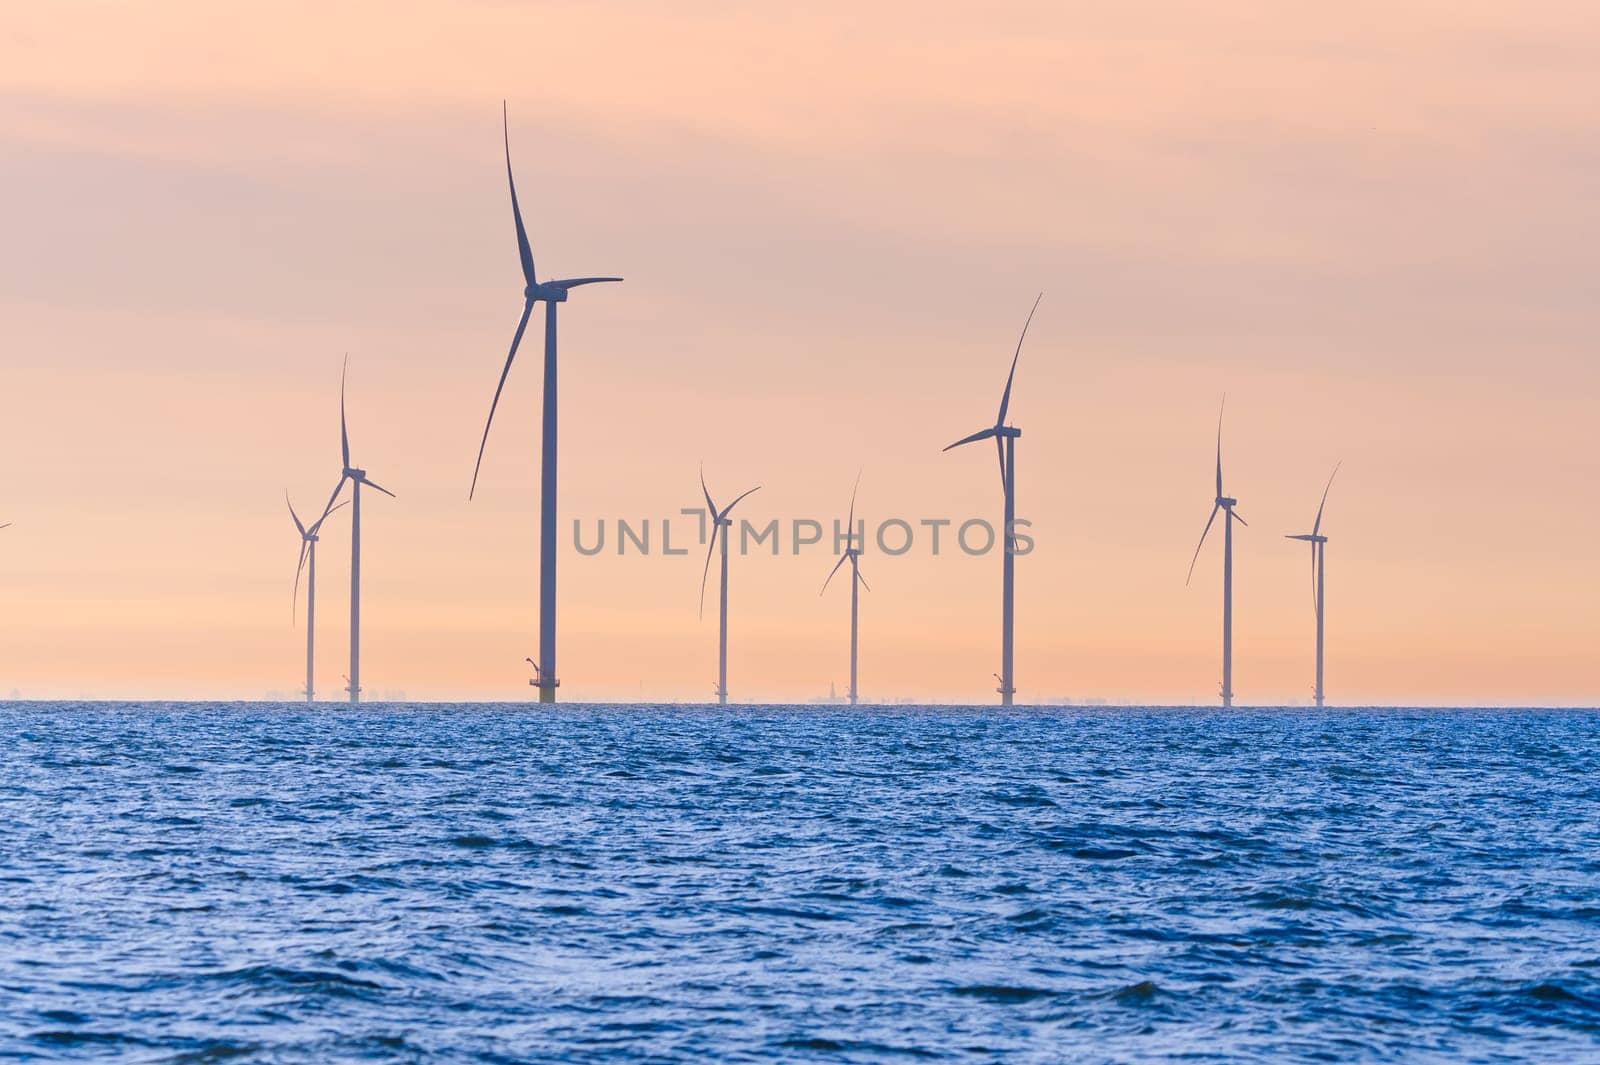 Offshore Windmill farm. windmills isolated at sea on a beautiful bright day Netherlands by PhotoTime